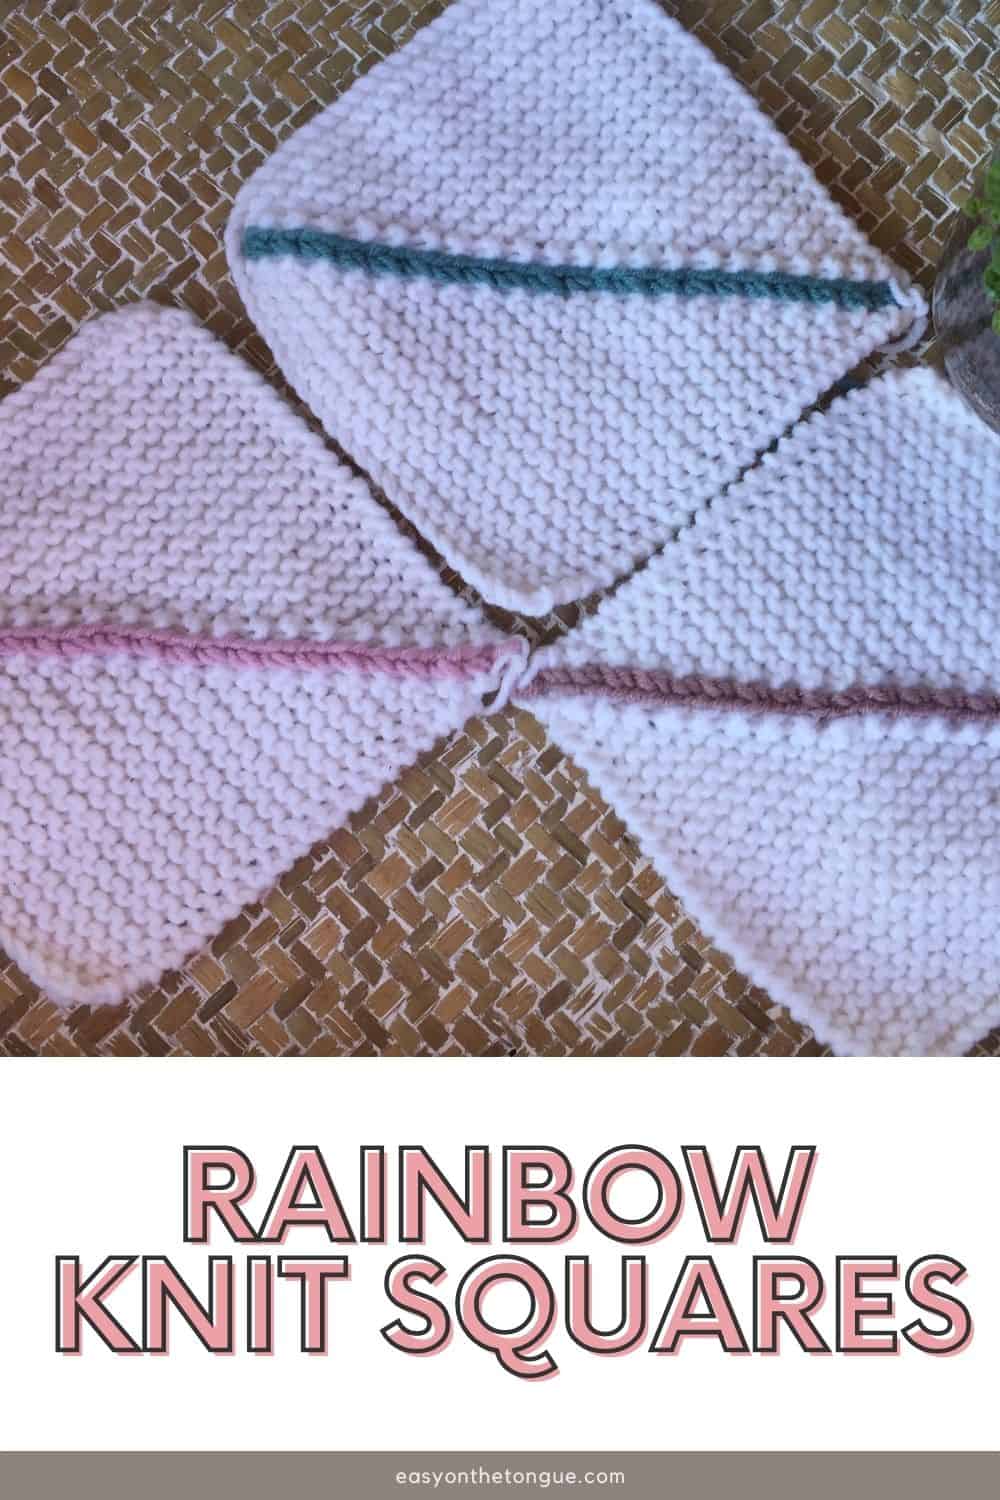 Rainbow knit squares click through for the free mitred square pattern on easyonthetongue.com  Knit your own Rainbow Blanket with this Mitred Square